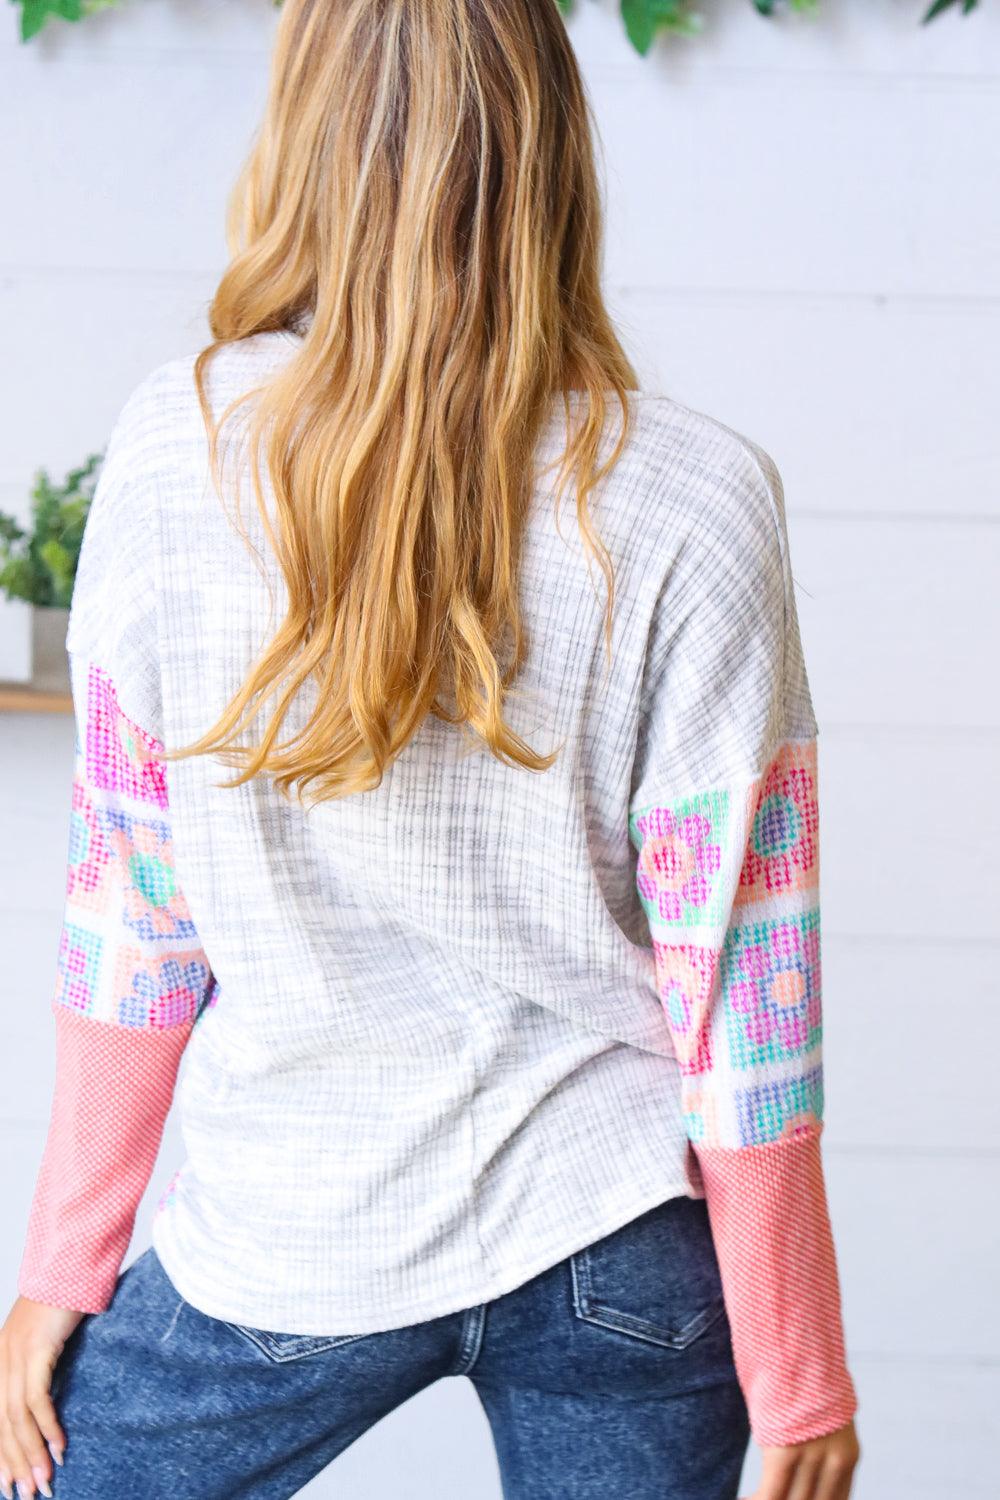 On The Vine Floral Print Top - Atomic Wildflower